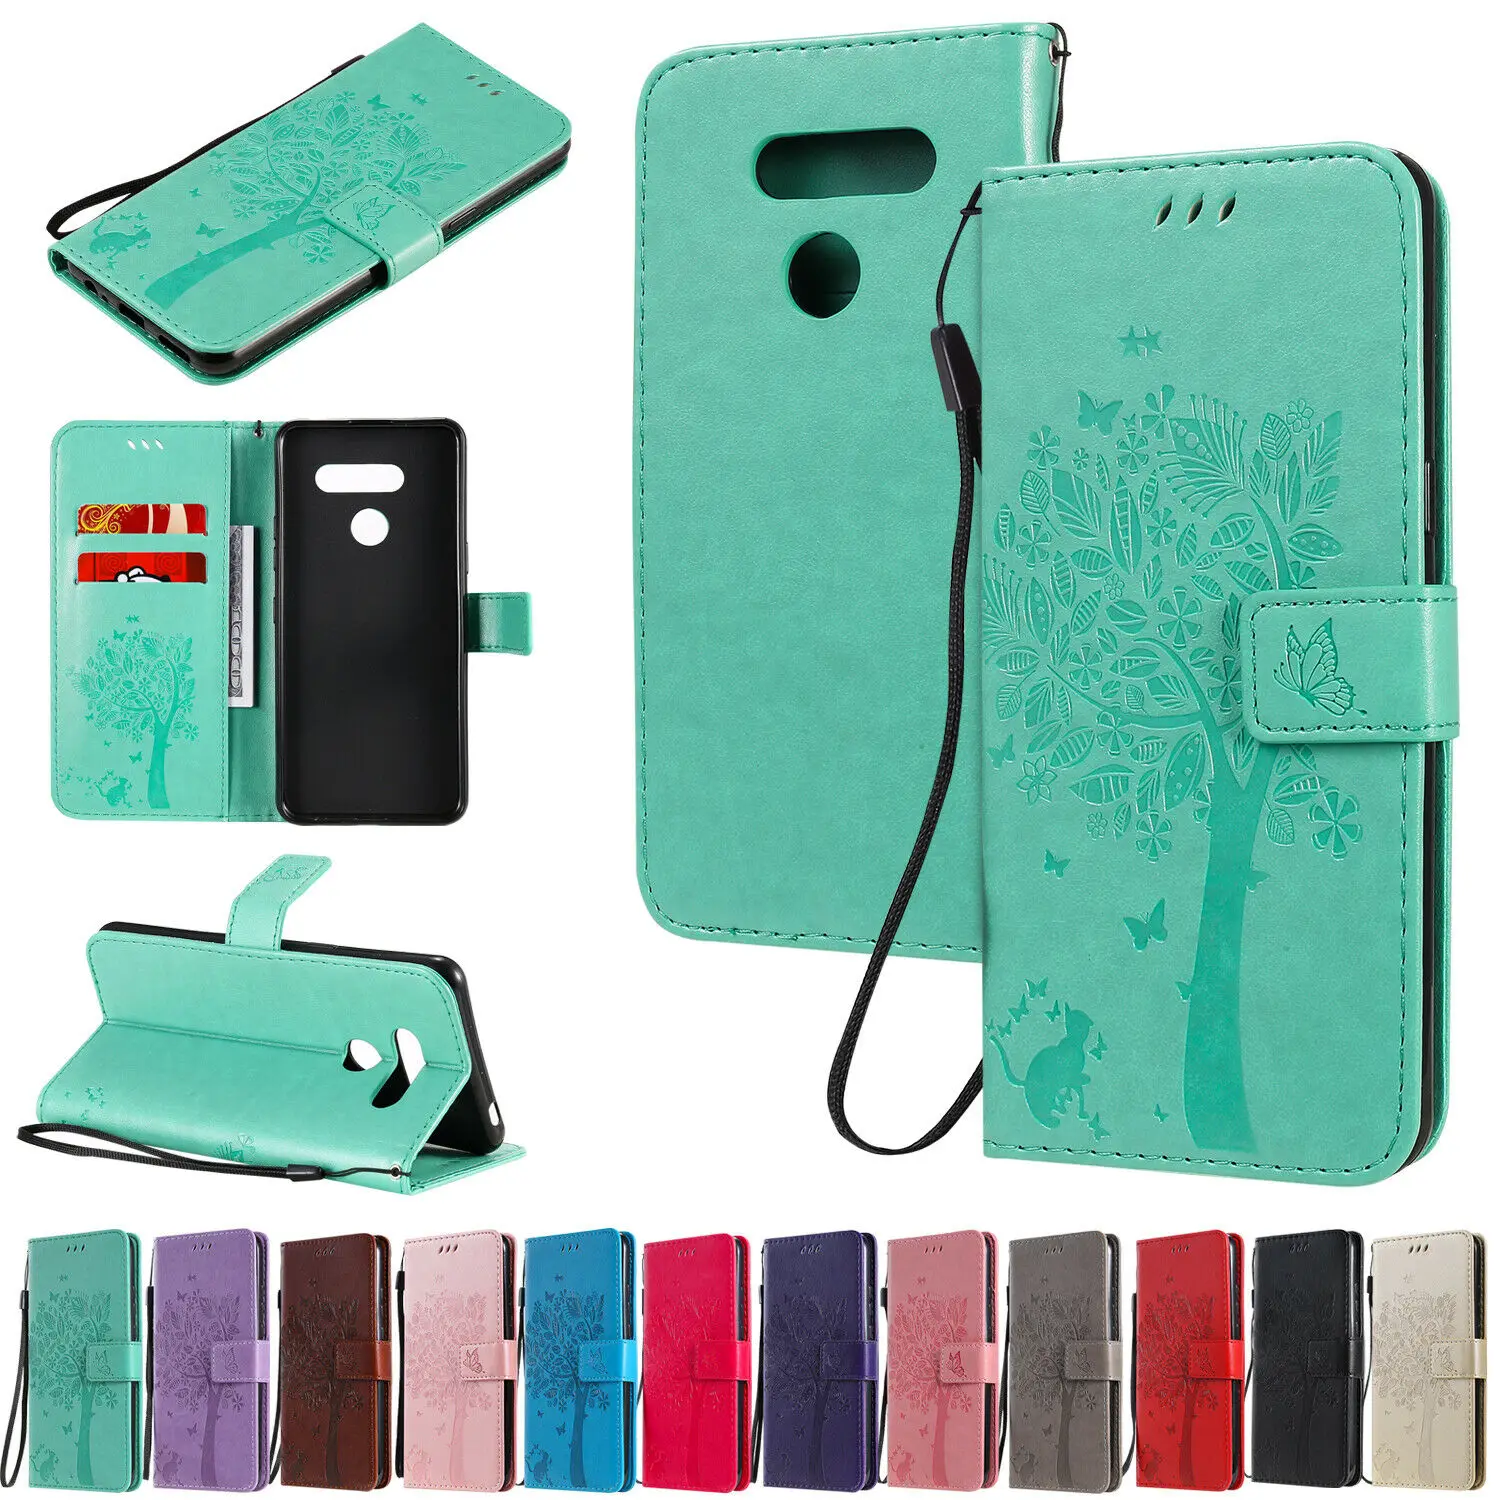 

For LG G9 K41s K50s K51 K61 Stylo 6 3D Cat & Tree Wallet Flip PU Leather Case Phone Cover Card Pocket Pouch Bag